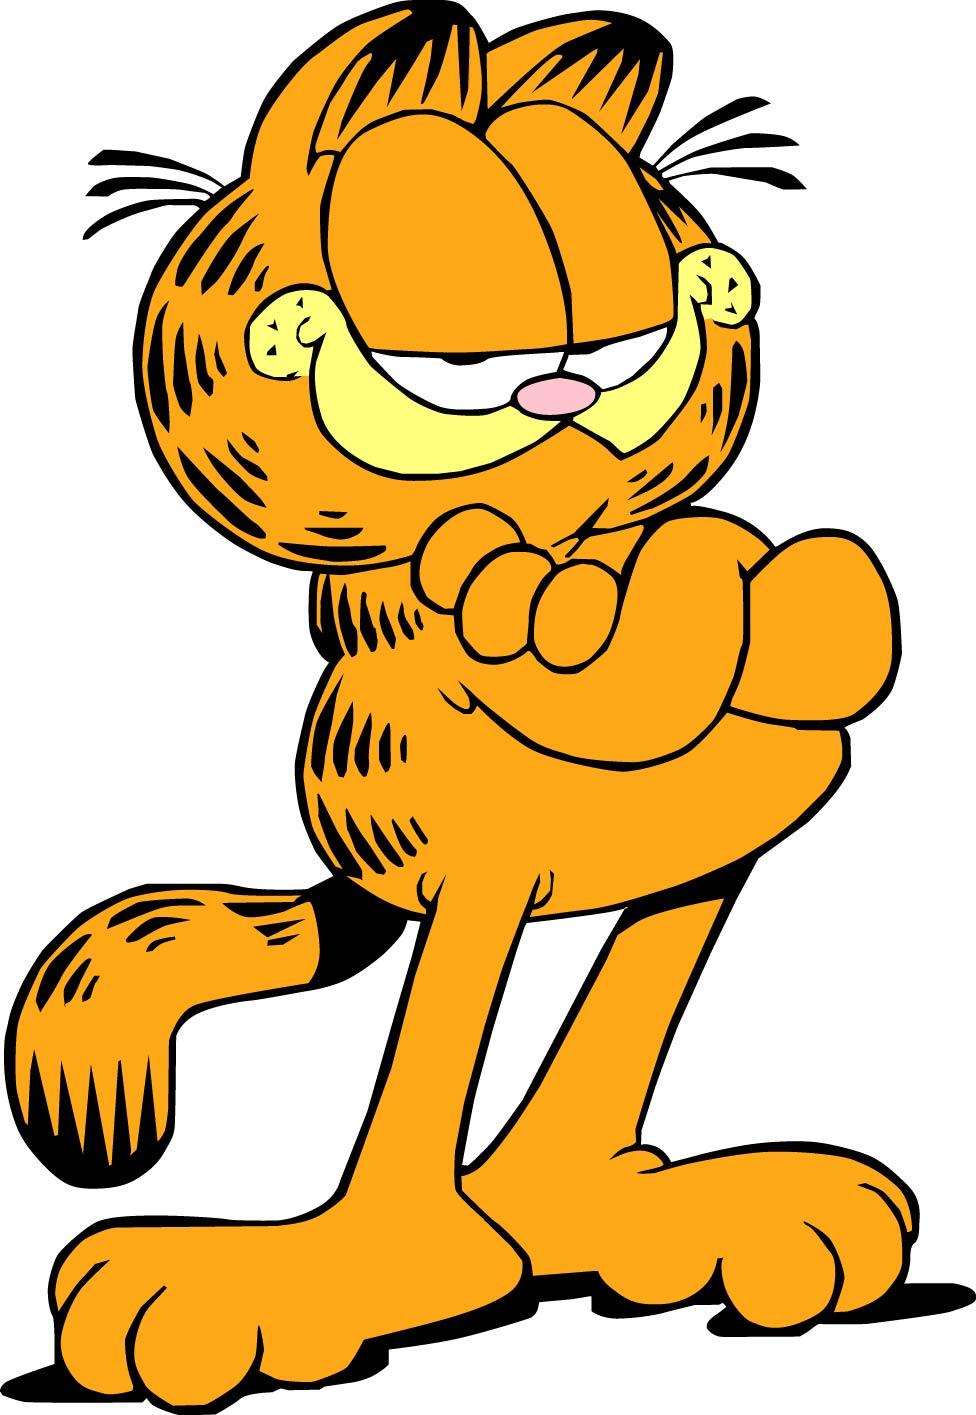 and Picture: Garfield, by Dorethea Chiasson for PC & Mac, Tablet